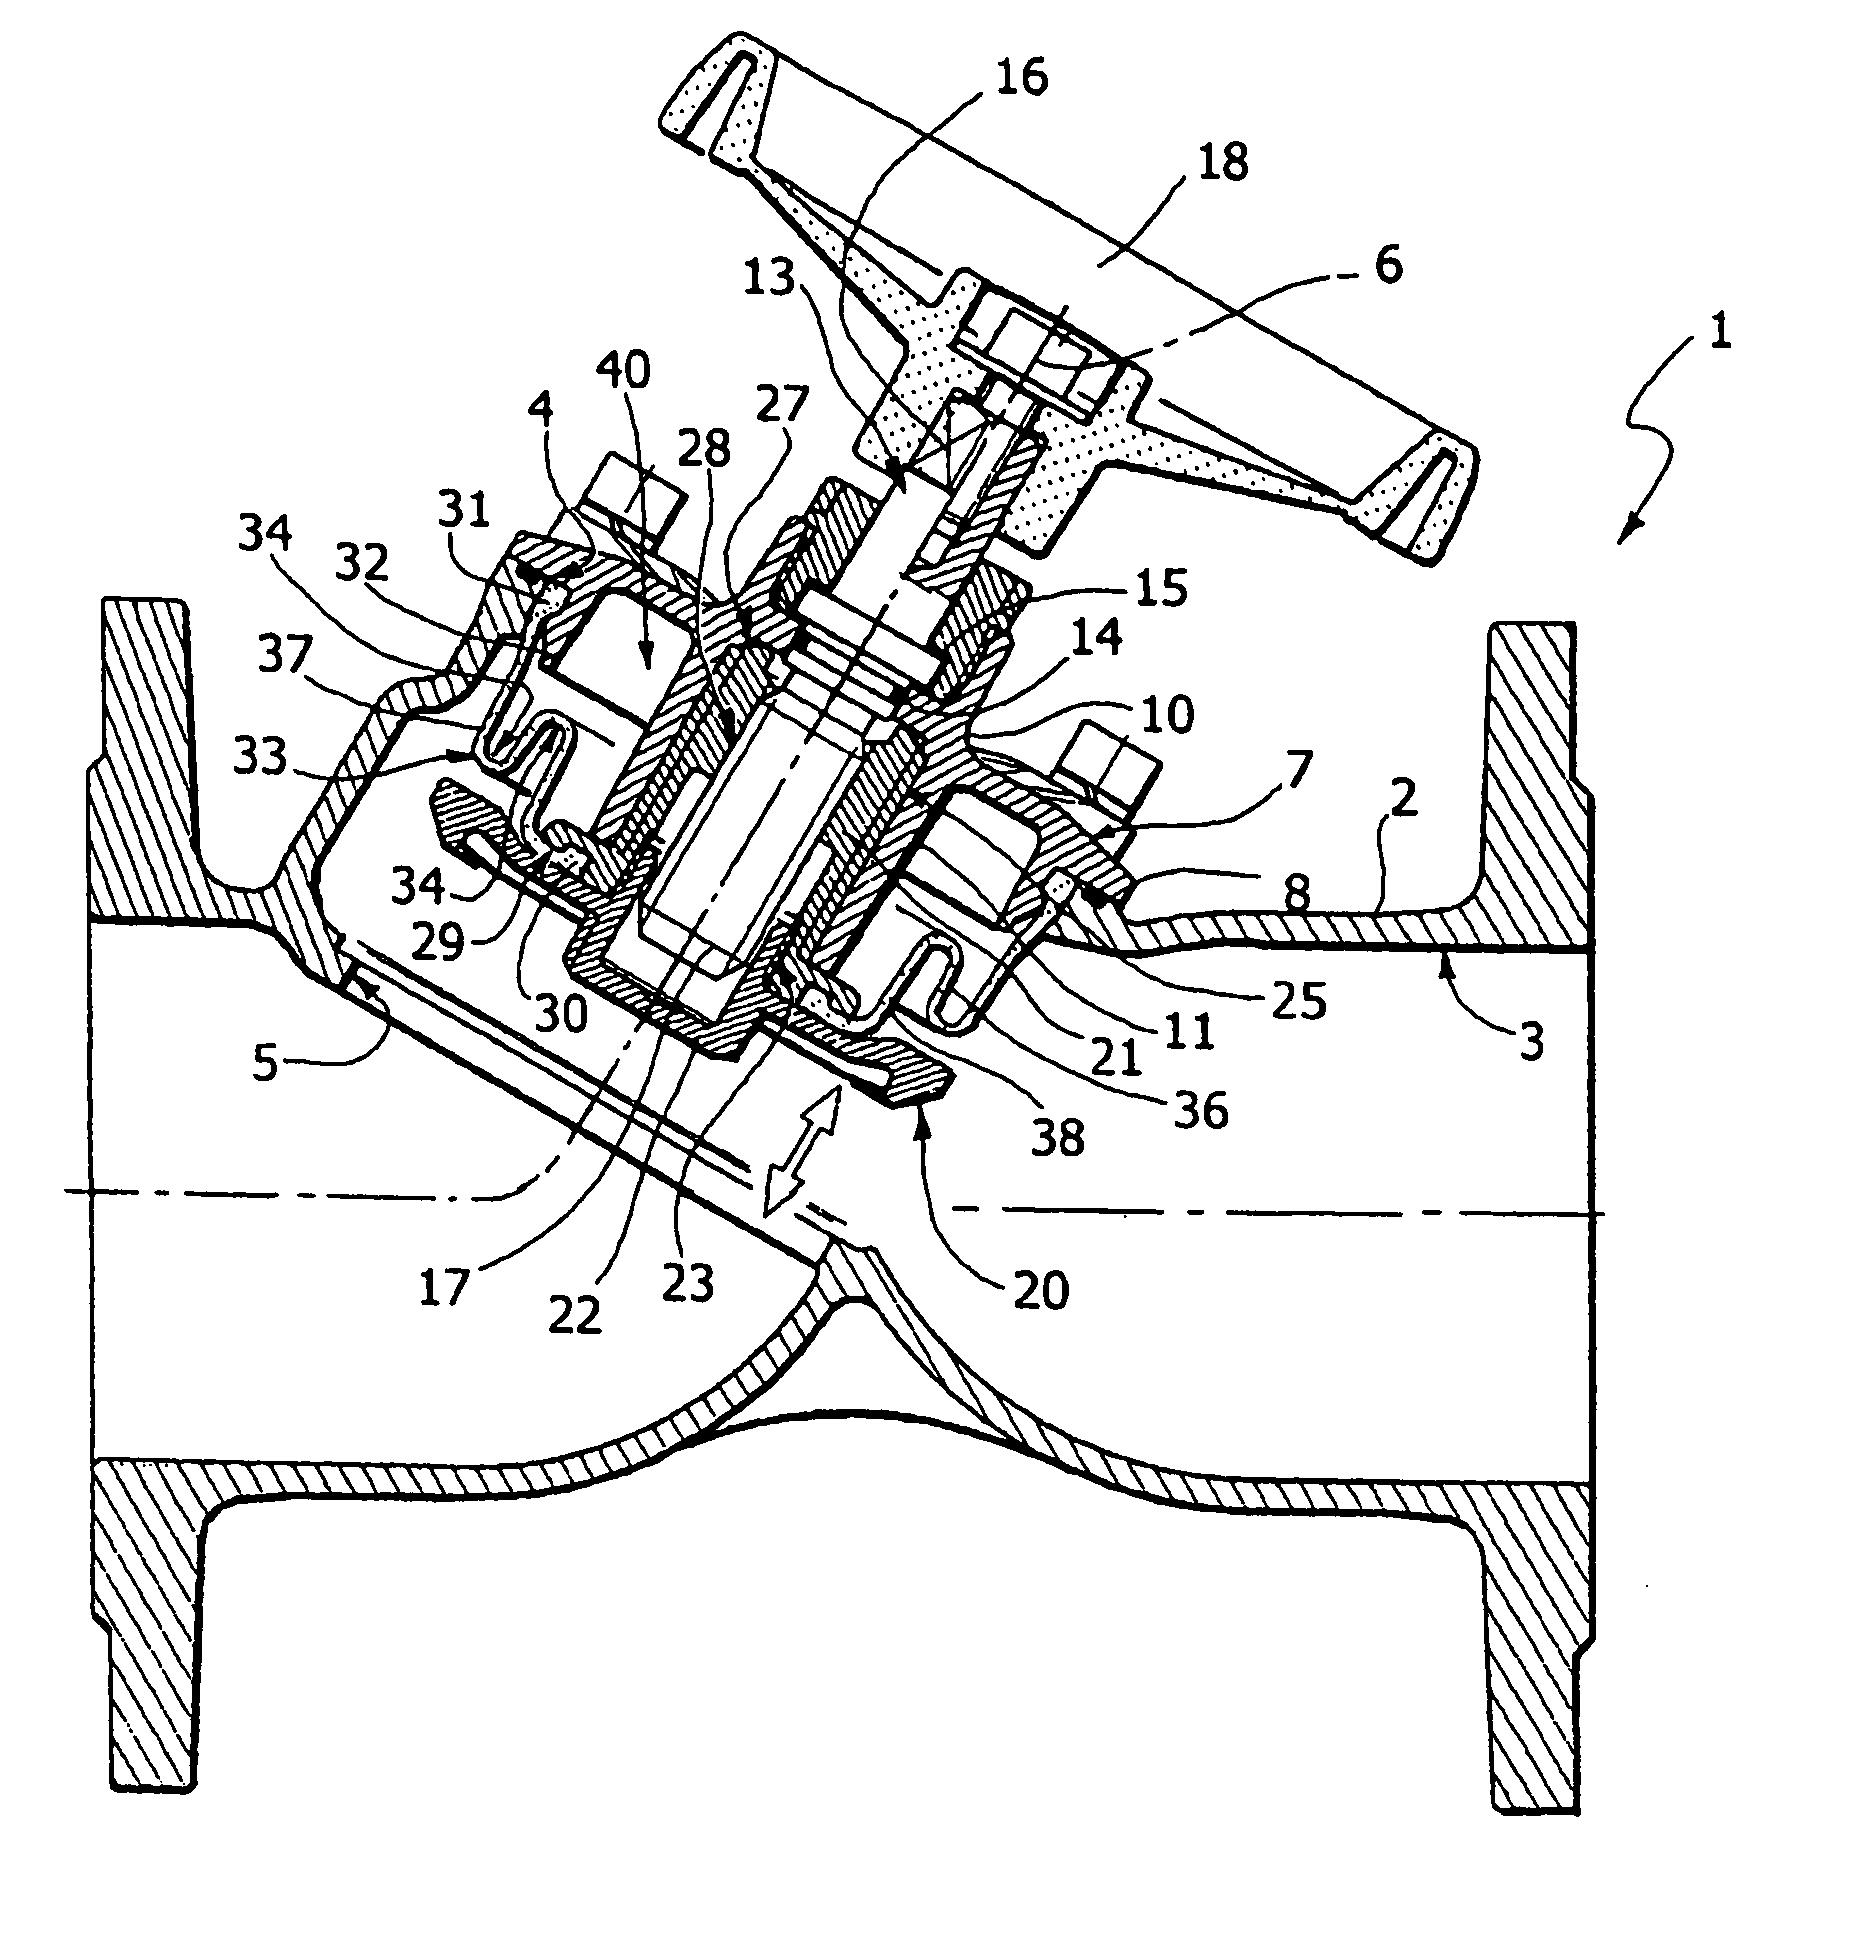 Valve for closing a seawater pipe